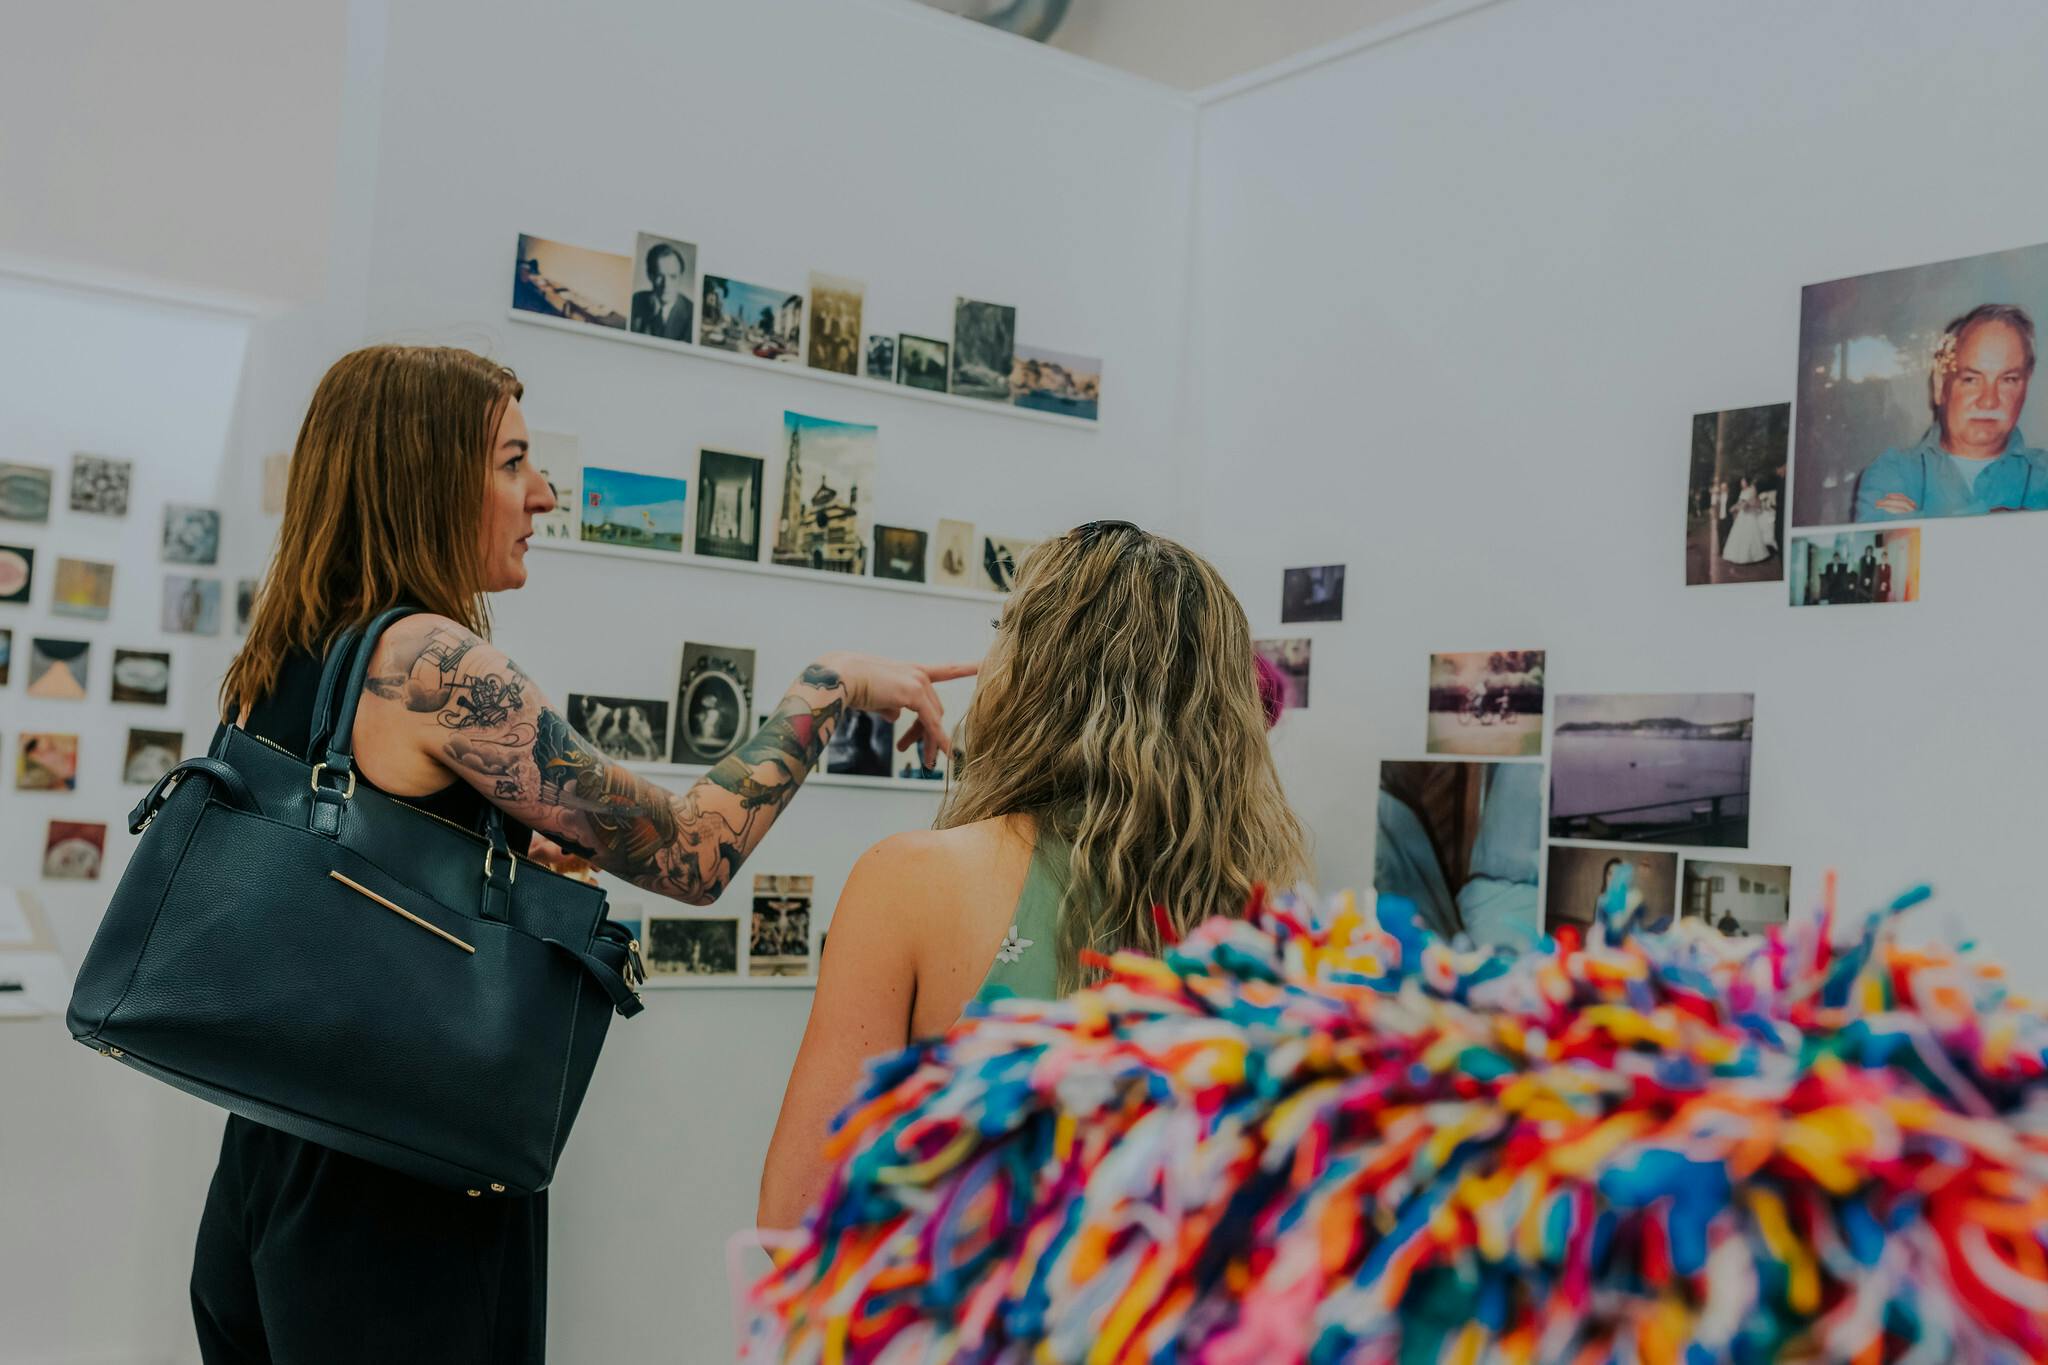 A heavily tattooed woman looking and pointing at photographs on the wall while a blonde woman with wavy hair looks on. In the foreground there is a colourful rainbow textile ball.